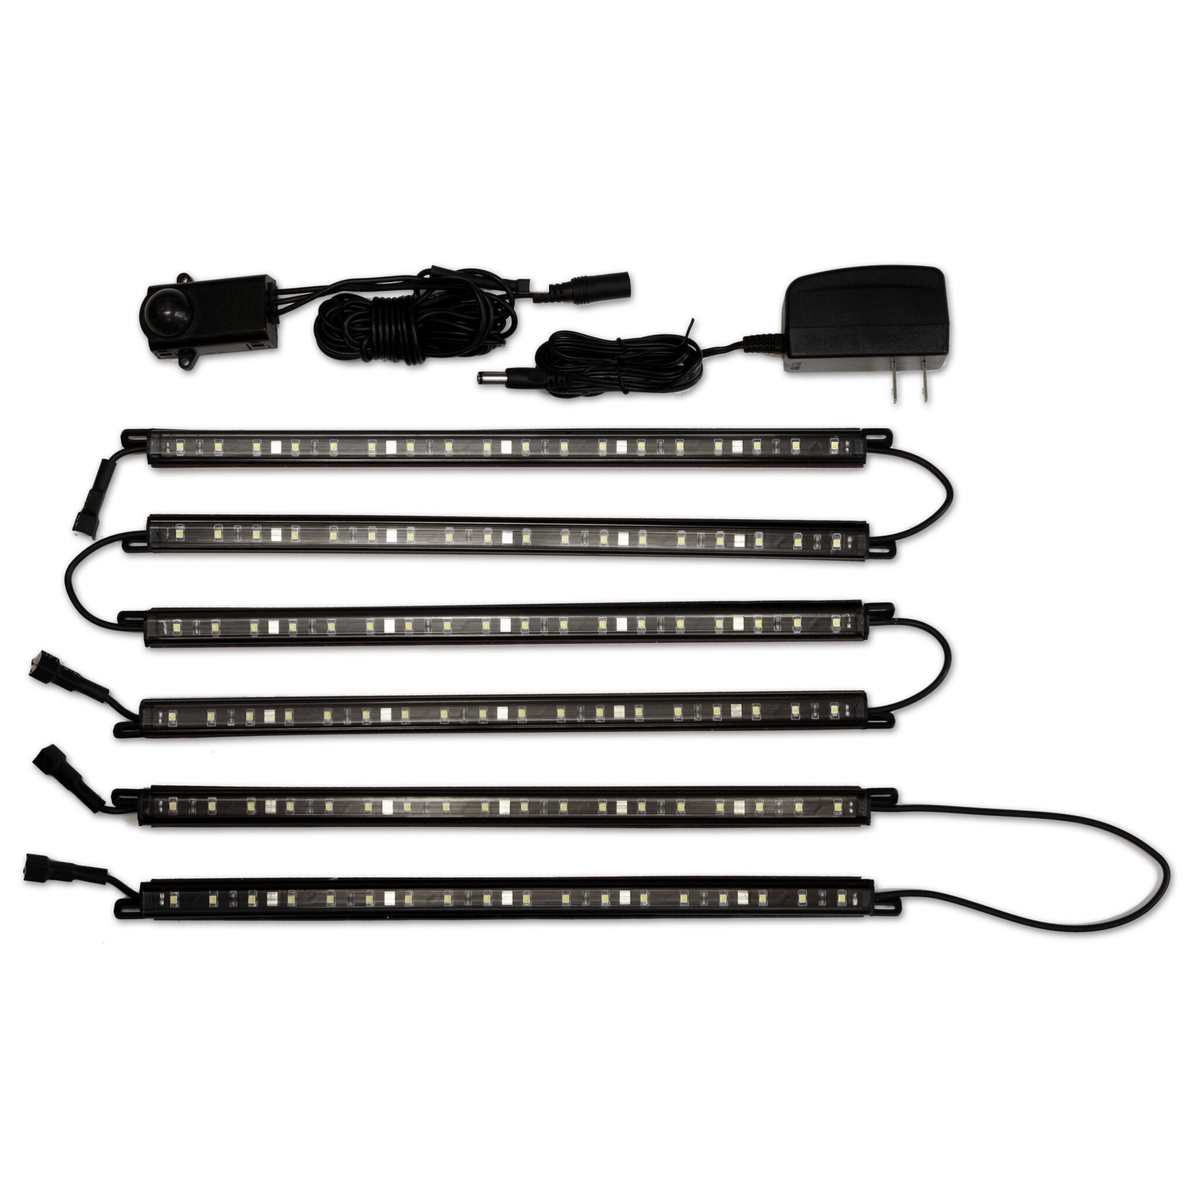 Accessory - Lights - Clearview Safe Light Kits